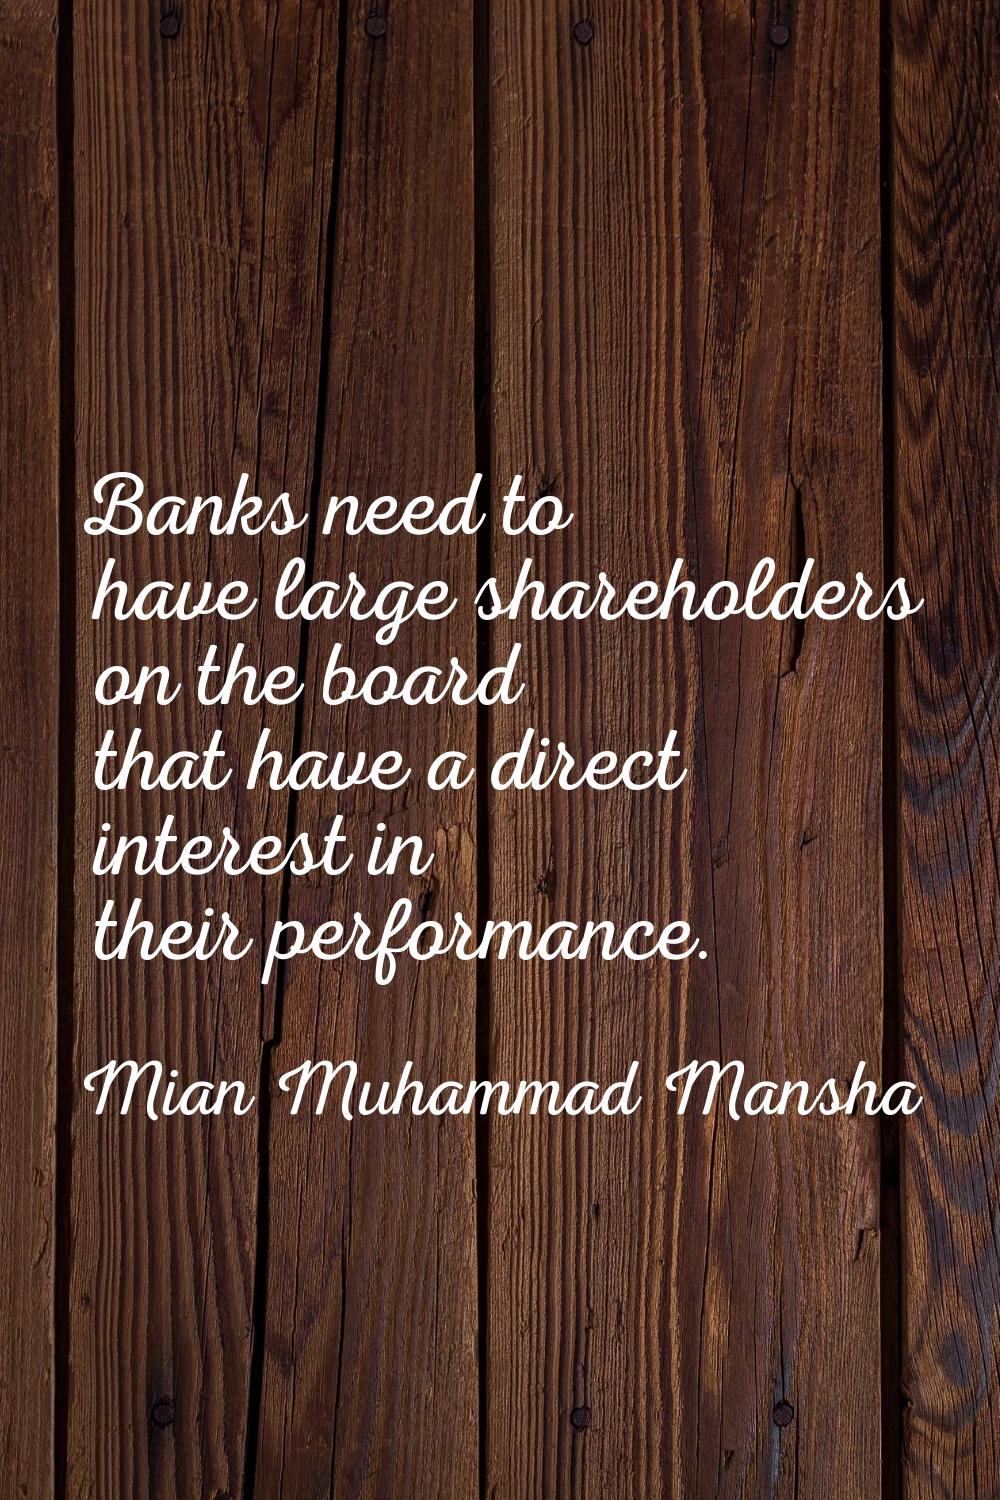 Banks need to have large shareholders on the board that have a direct interest in their performance